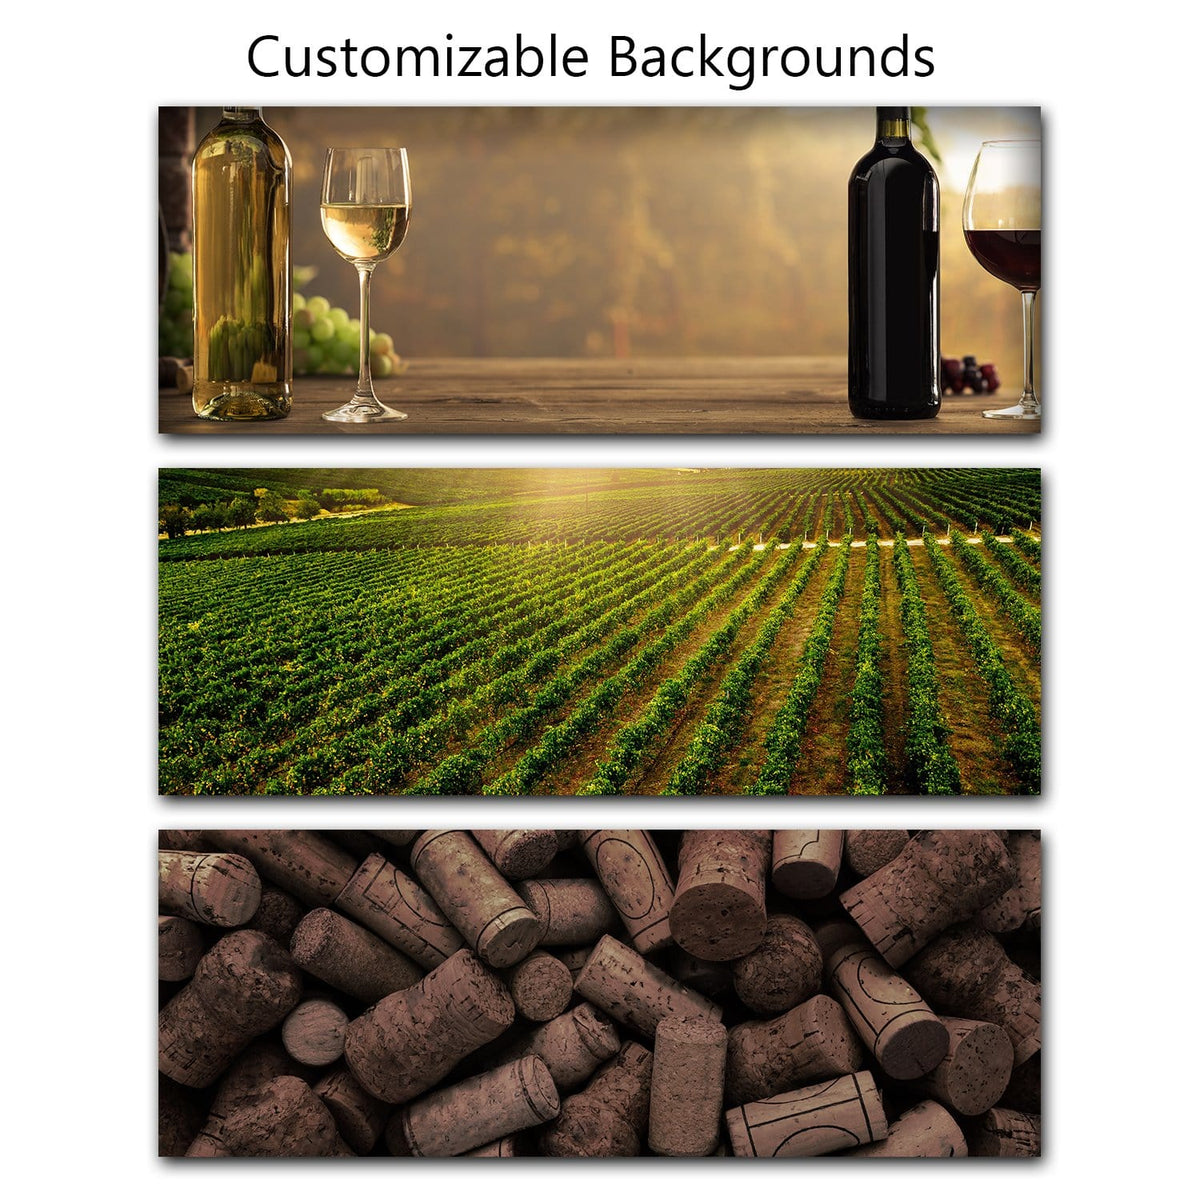 Fully customize your print with several great wine theme background options